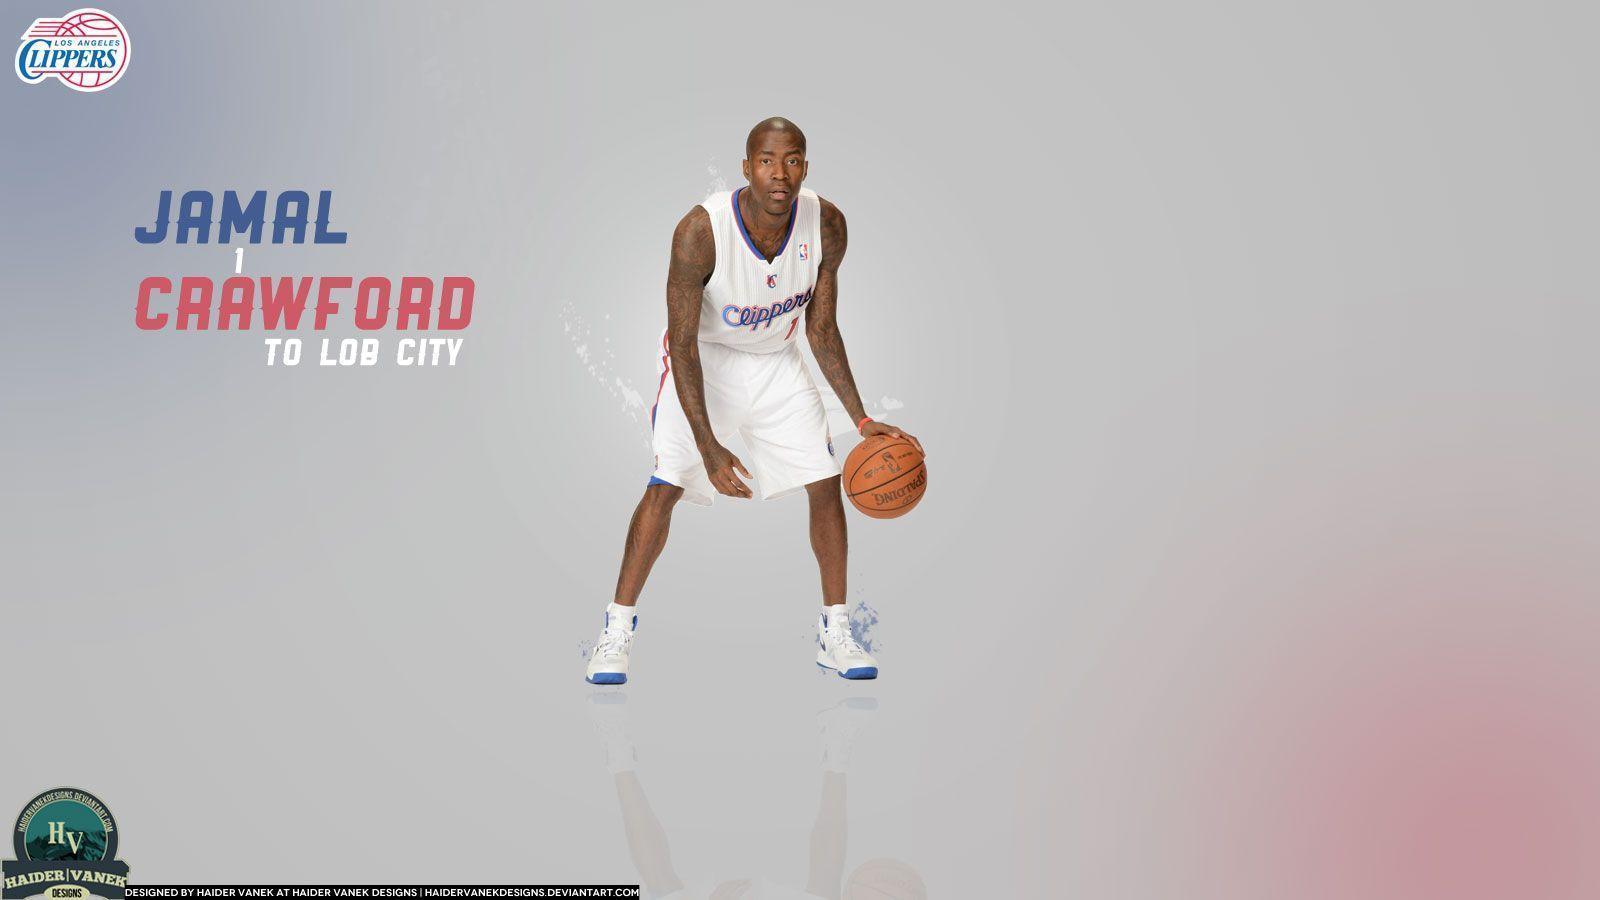 Los Angeles Clippers Wallpapers